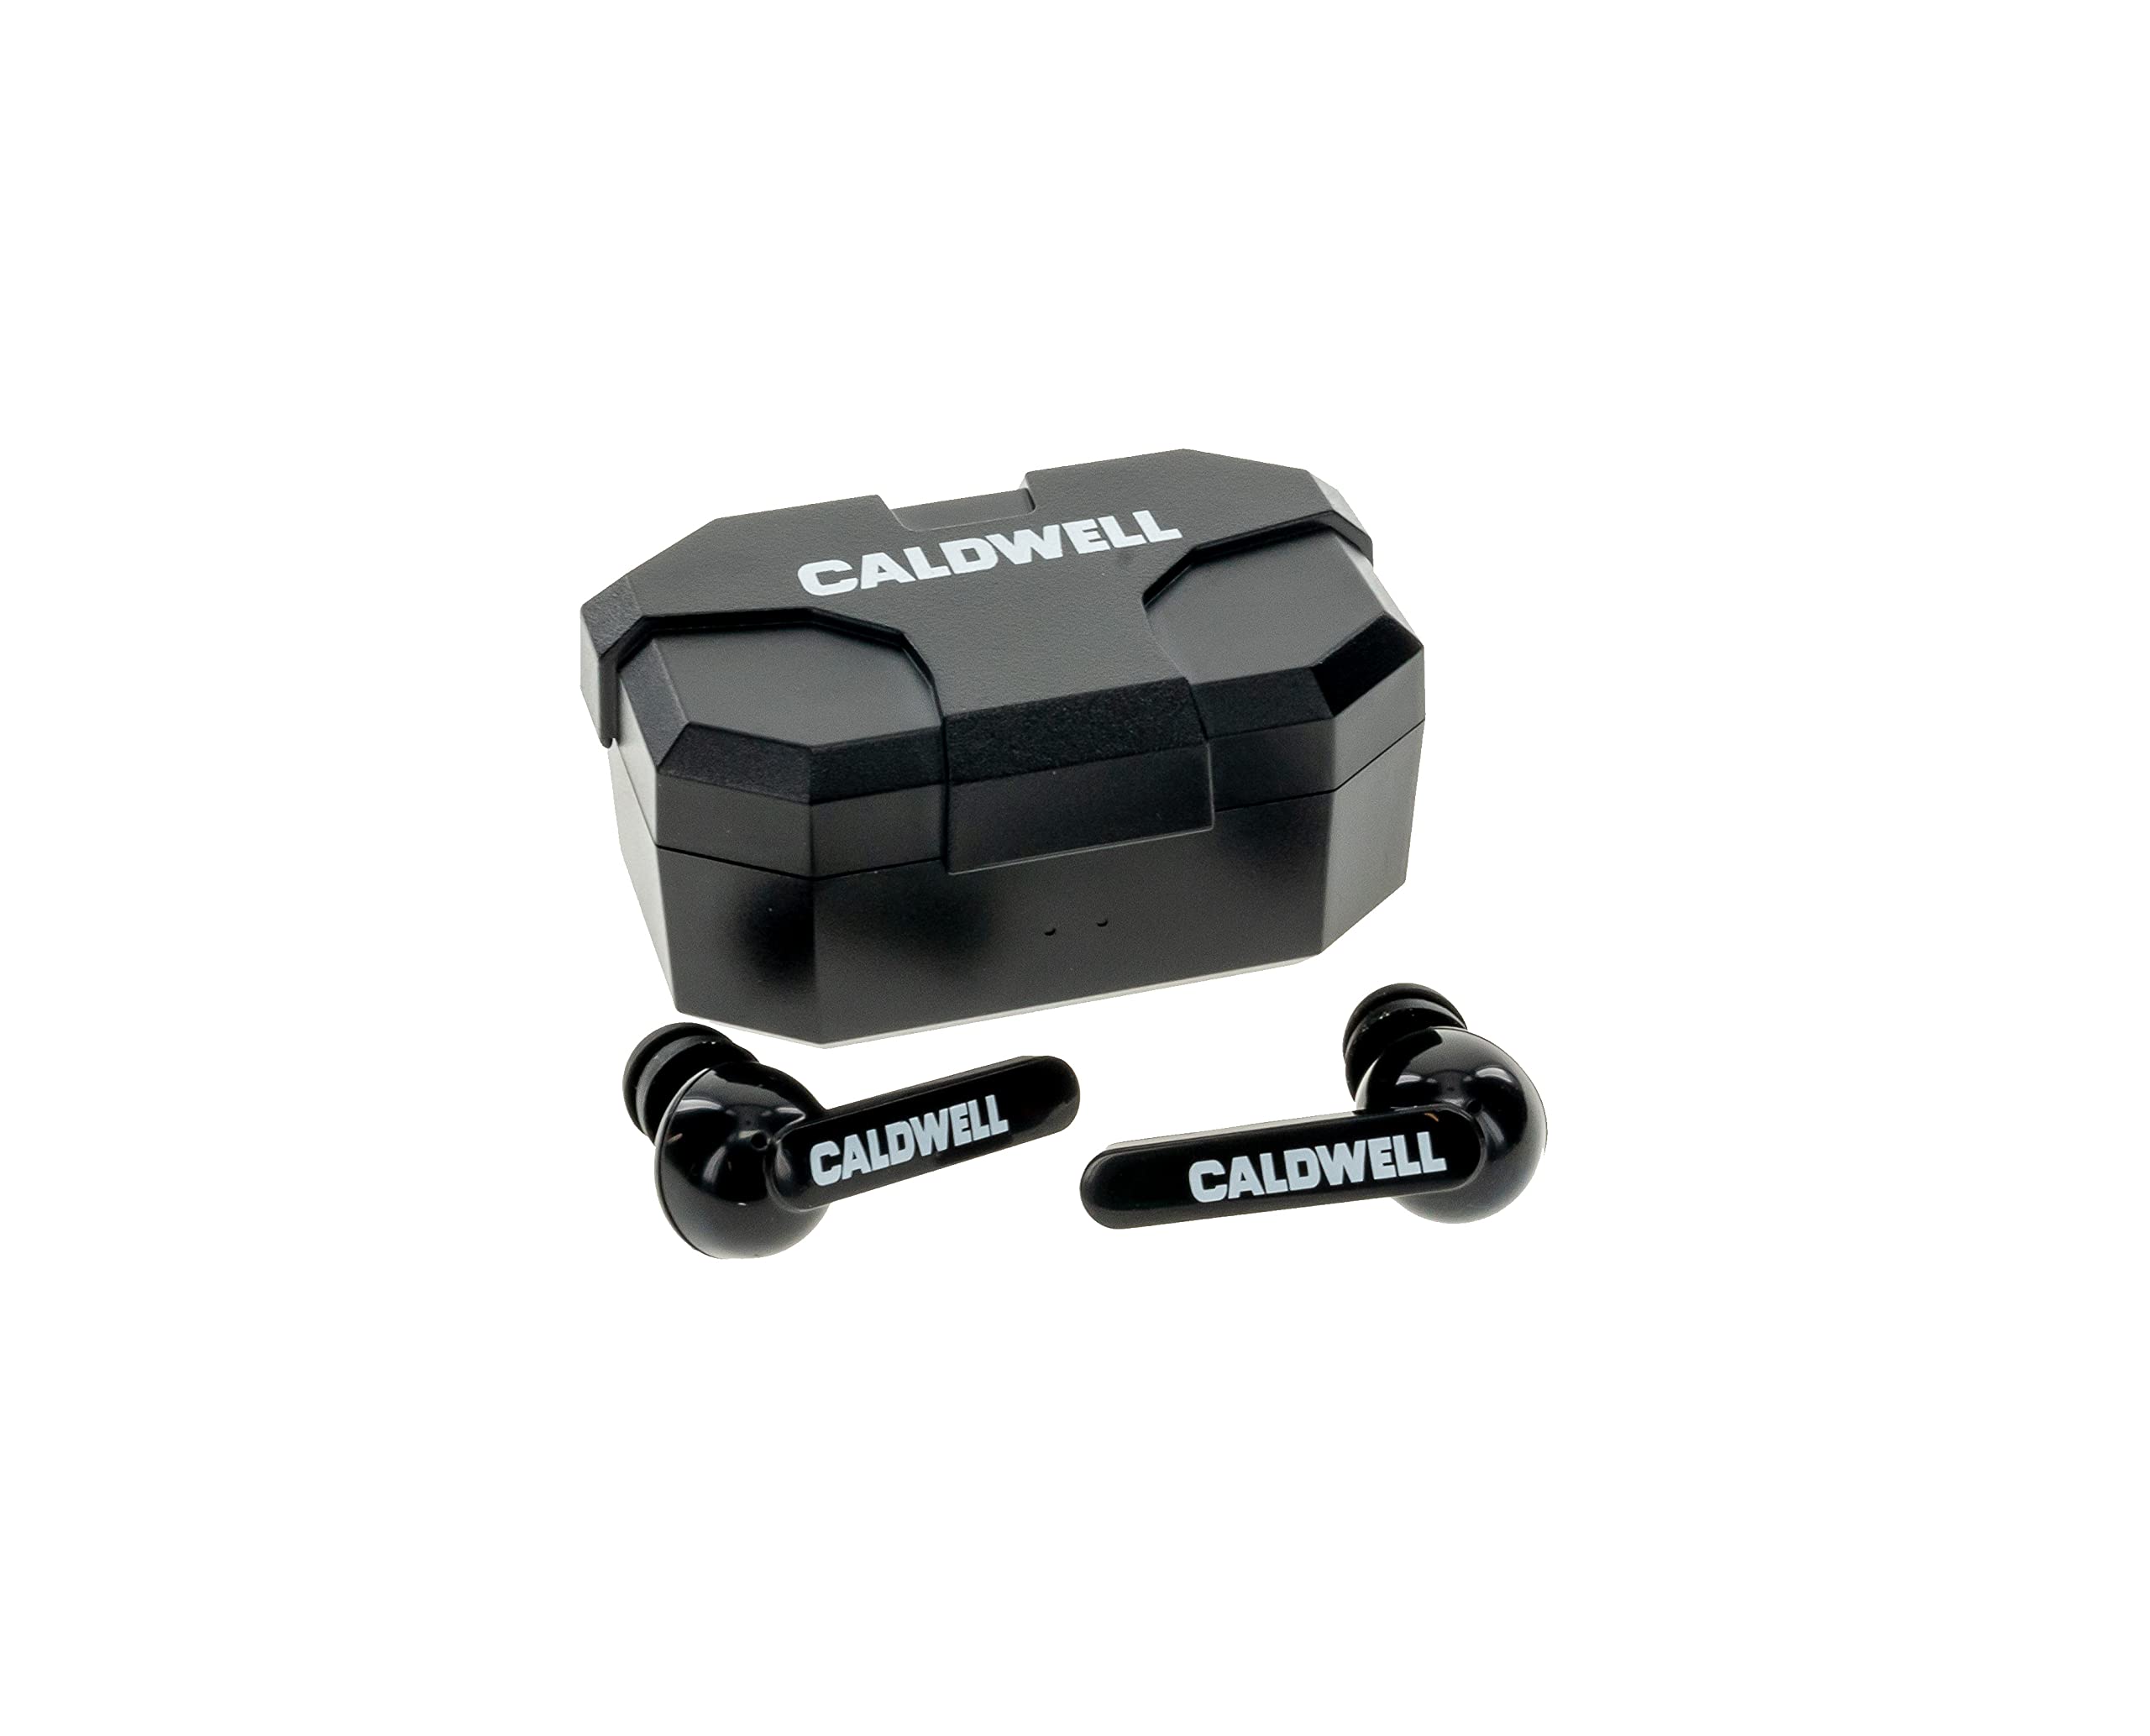 Caldwell E-Max Shadows 23 NRR Electronic Hearing Protection w/ Bluetooth Connectivity for Shooting, Hunting, & Range (Black) $55.10 + Free Shipping